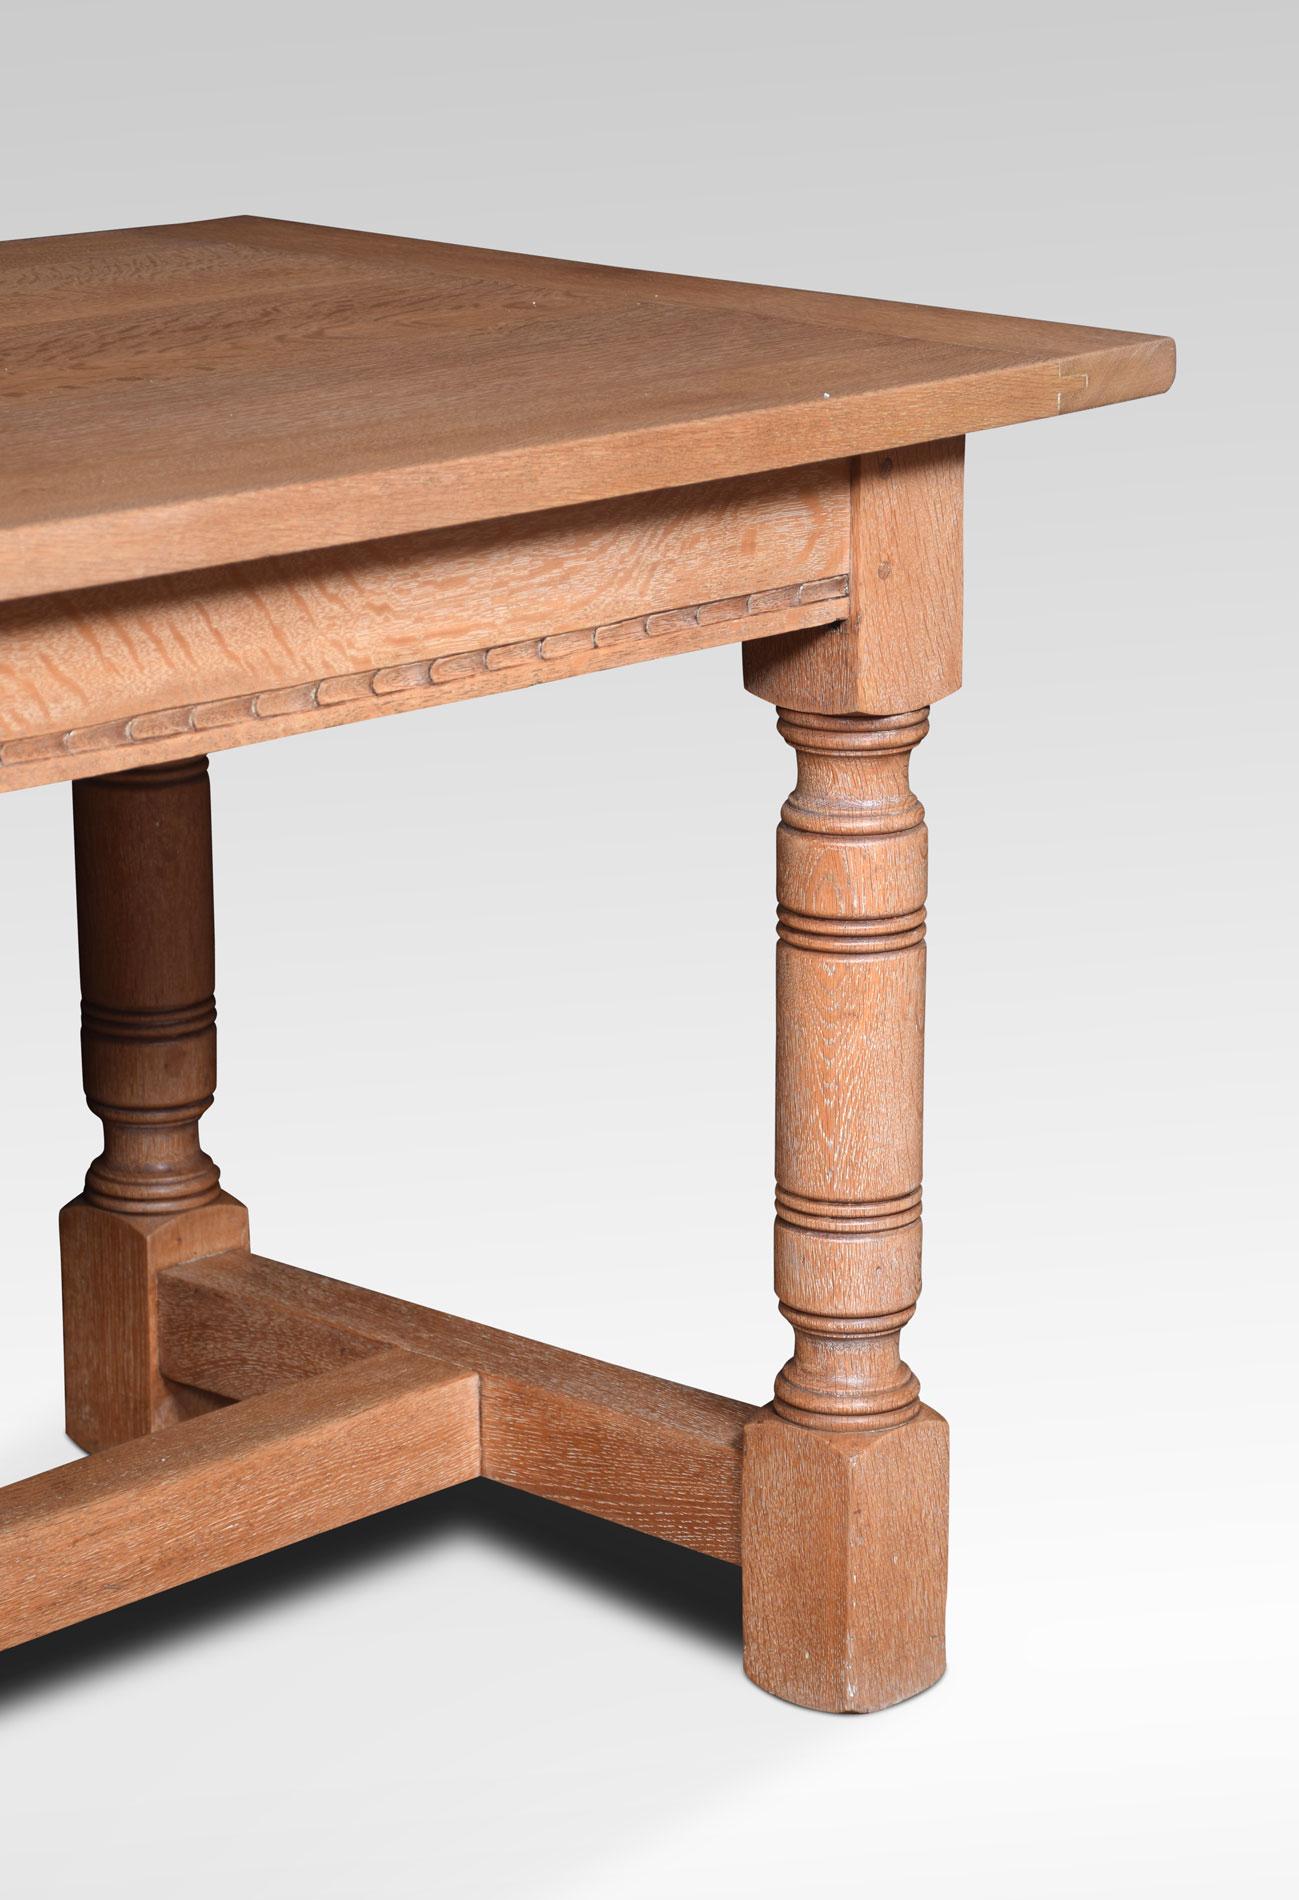 Limed oak refectory table. The large rectangular plank top, raised on four turned supports united by H stretcher.
Dimensions
Height 30 inches
Width 72 inches
Depth 29.5 inches.